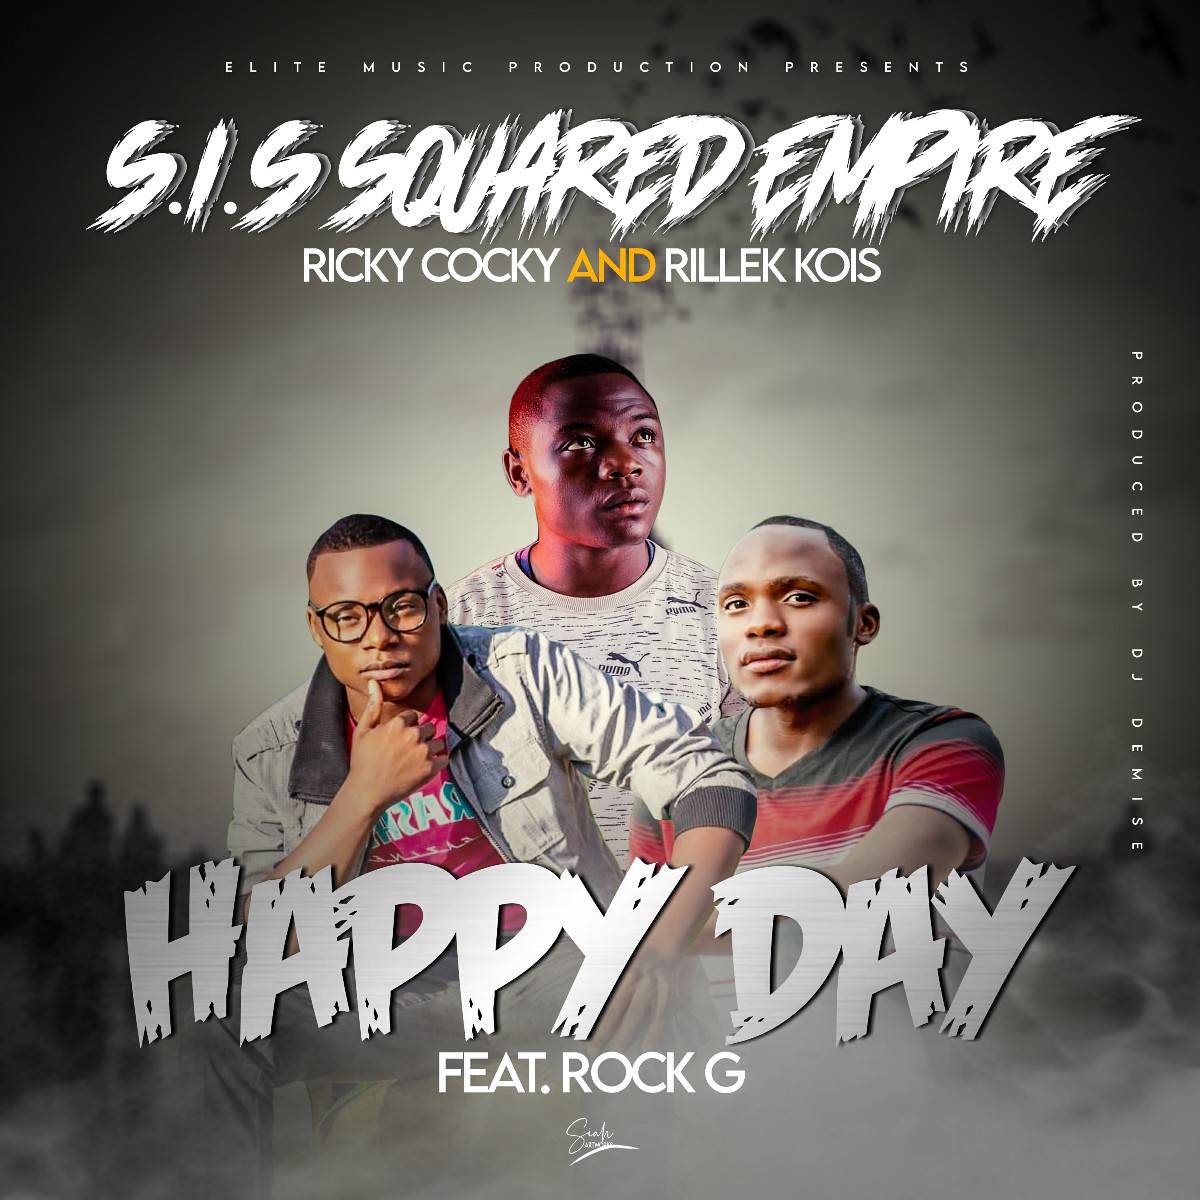 S.I.S Squared Empire ft. Rock G - Happy Day